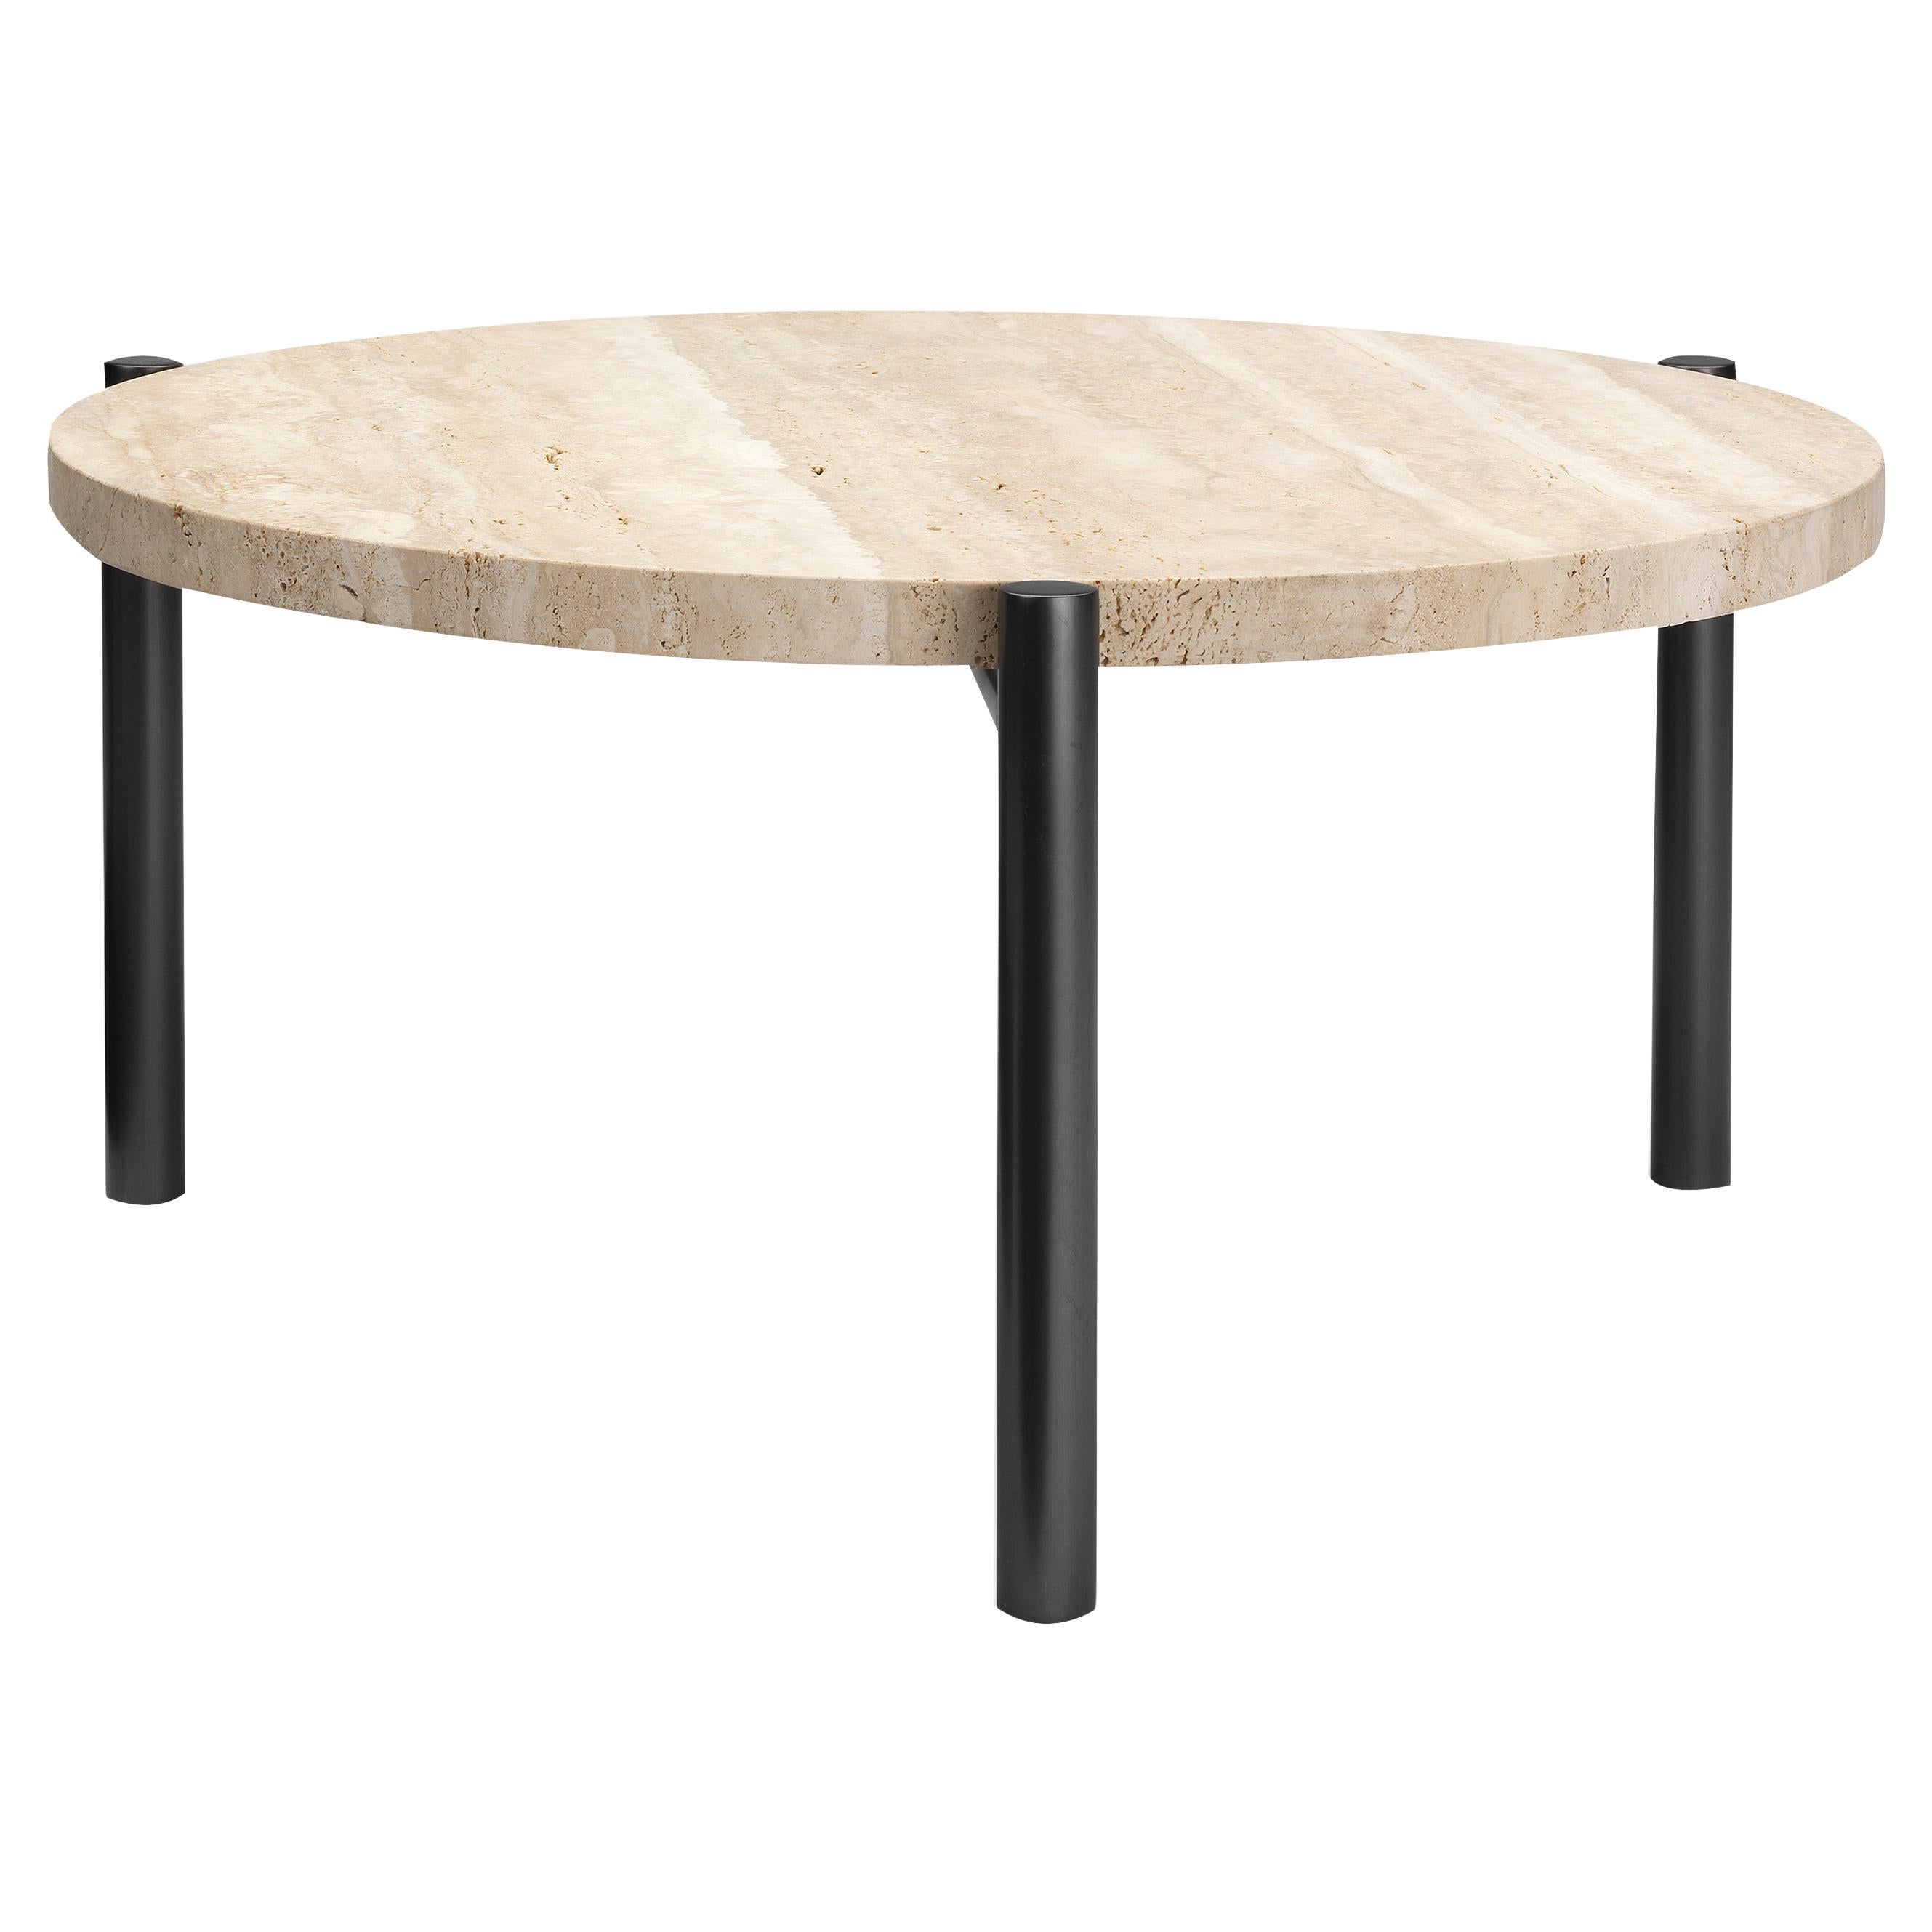 Tivoli Side Table Round 3 Legs Brass or Bronze Plated and Travertine Top